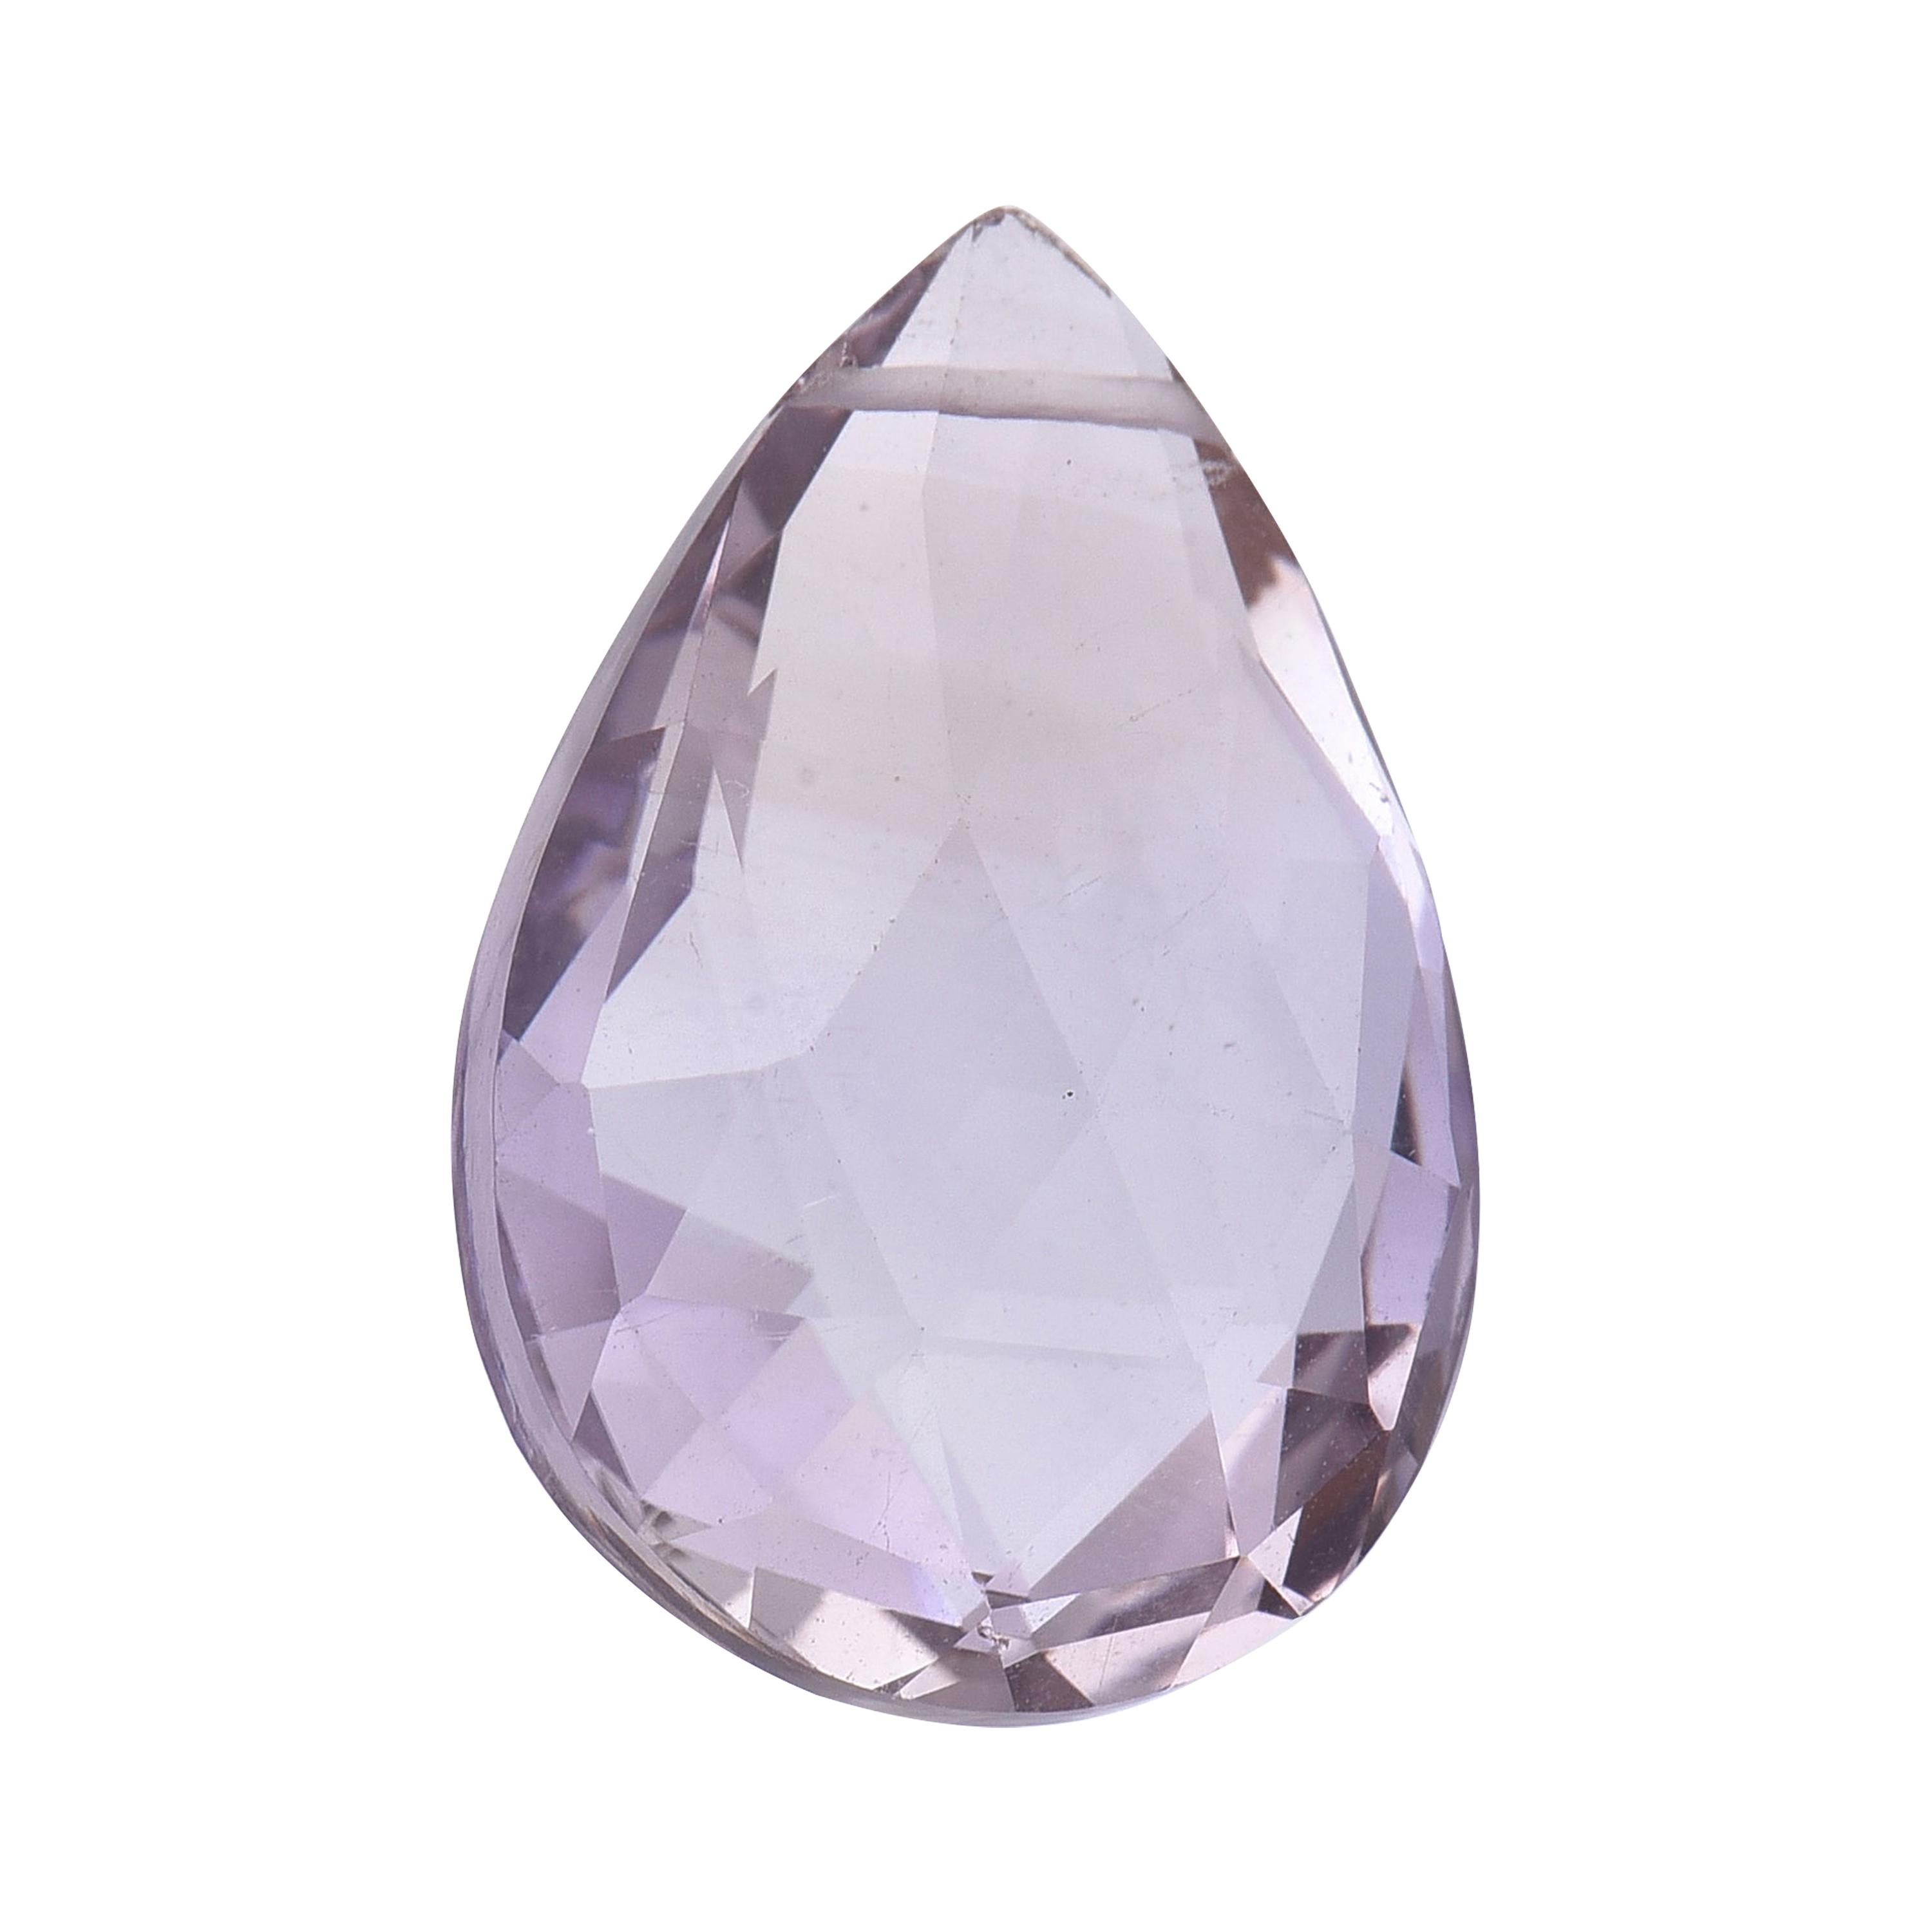 TJD Loose Natural Amethyst 4.50 Carats Pear Shape Gemstone for any Jewellery